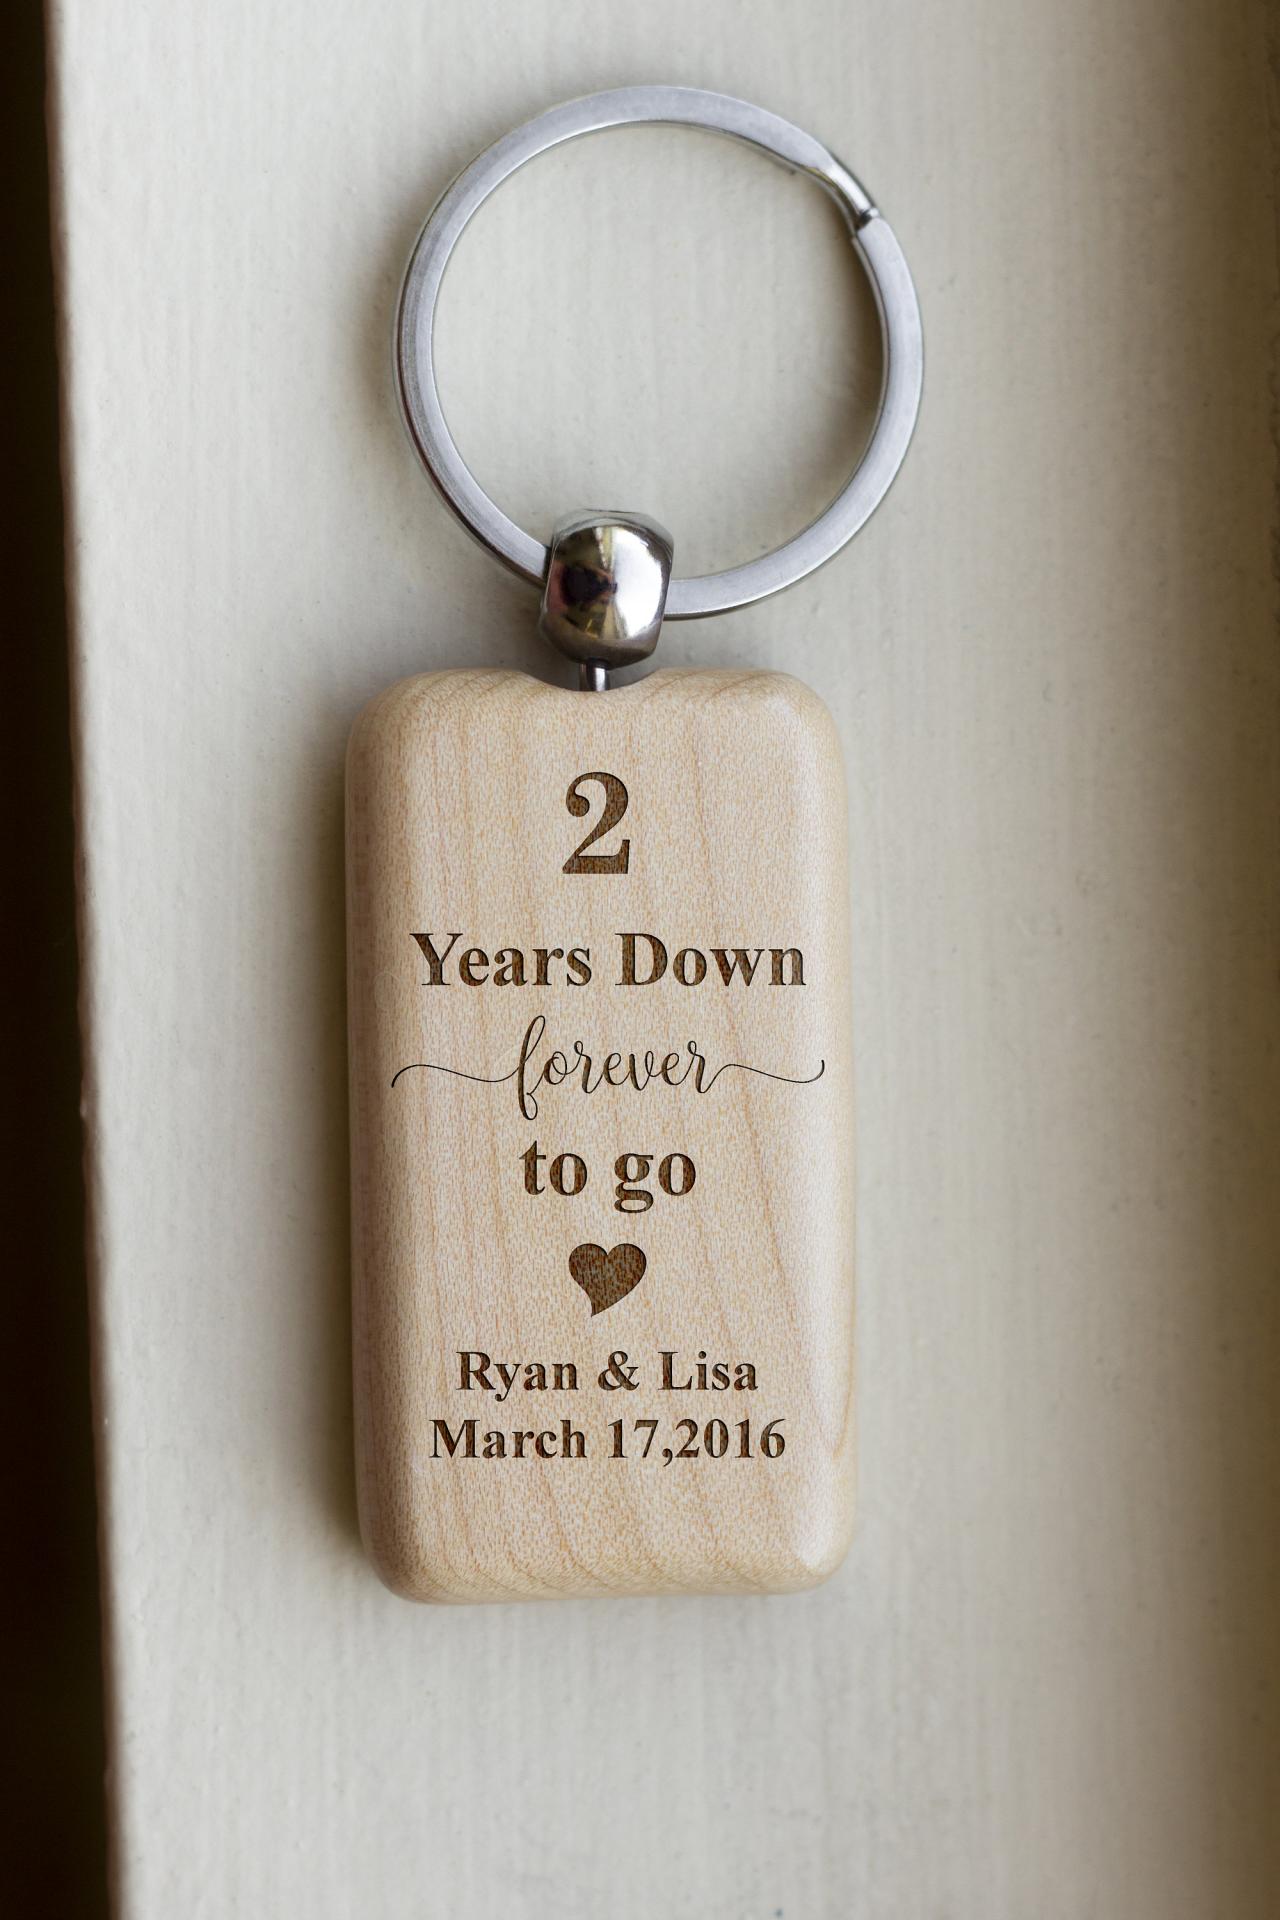 Personalize Key Chain,2 Yeas Down Key Chain, Love Key Chain,custom Key Chain, Wood Key Chain, Gift For Her ,anniversary Gift, Memory,forever